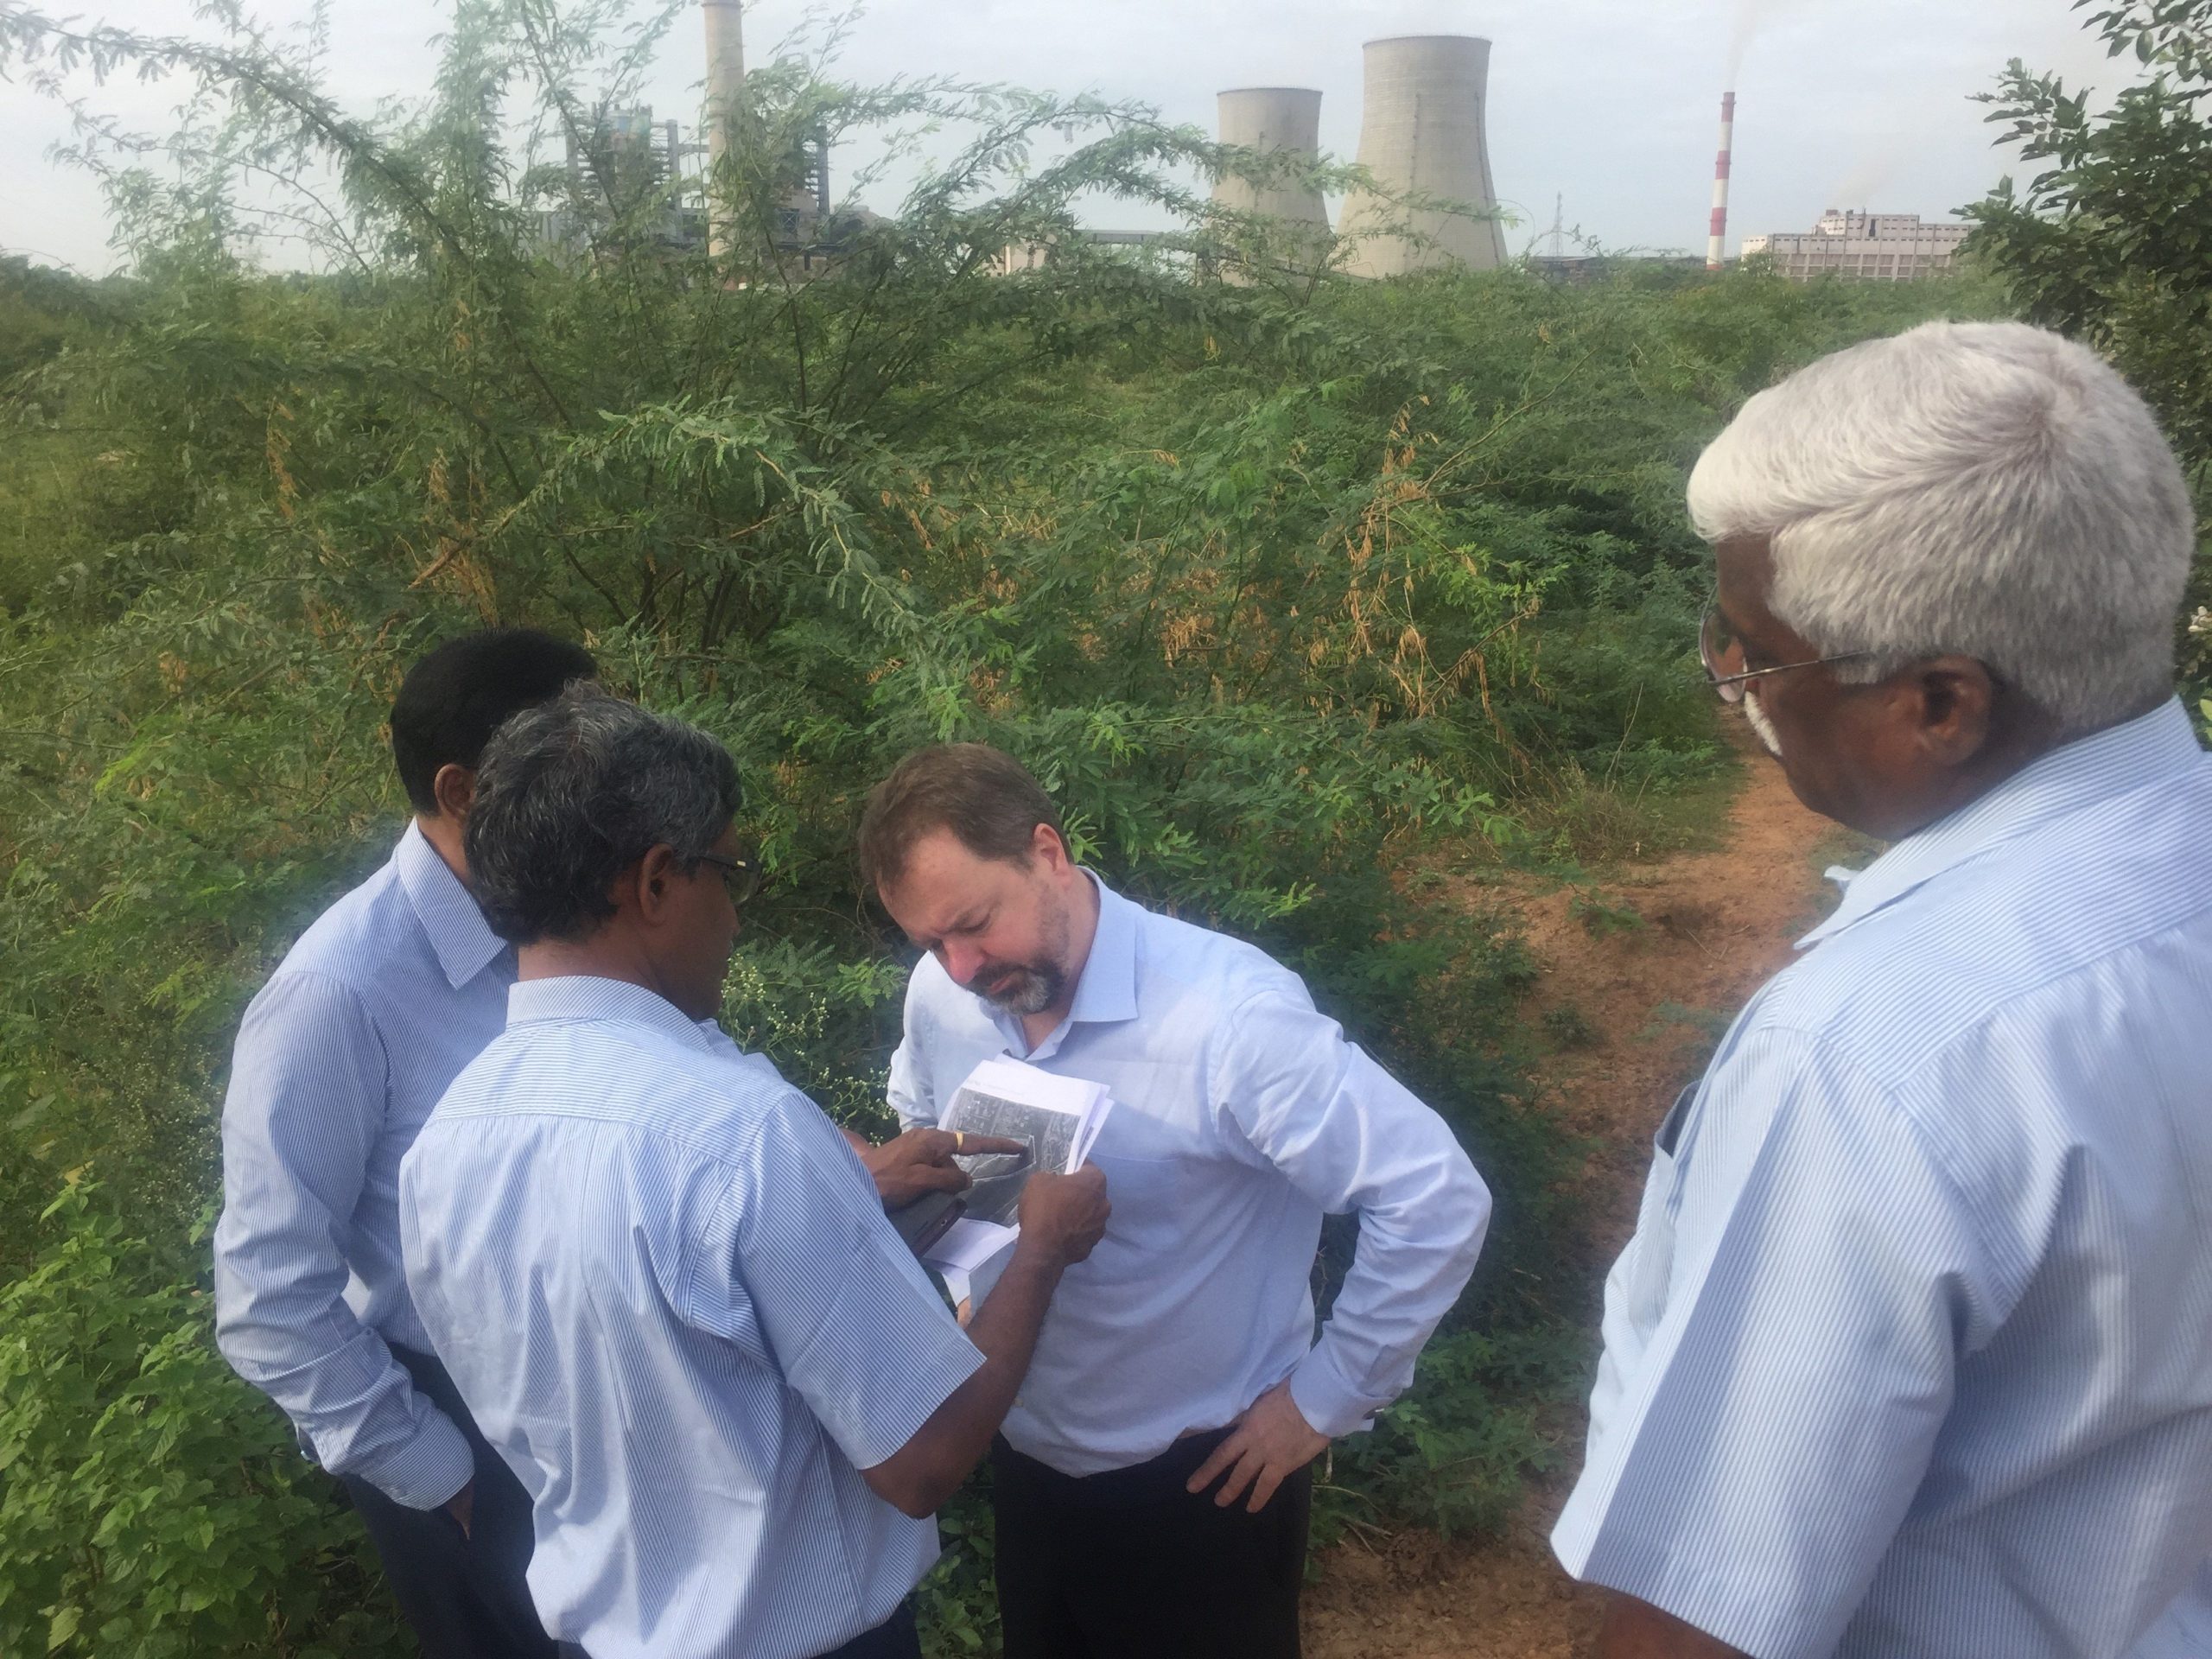 Above: Mr Ashley Moore, Managing Director, ECT discusses the preferred site location with Management from NLC’s Centre for Applied Research and Development, Mr V. Manoharan, Mr M.P. Ambalavanan and Mr P. Veerabalu.